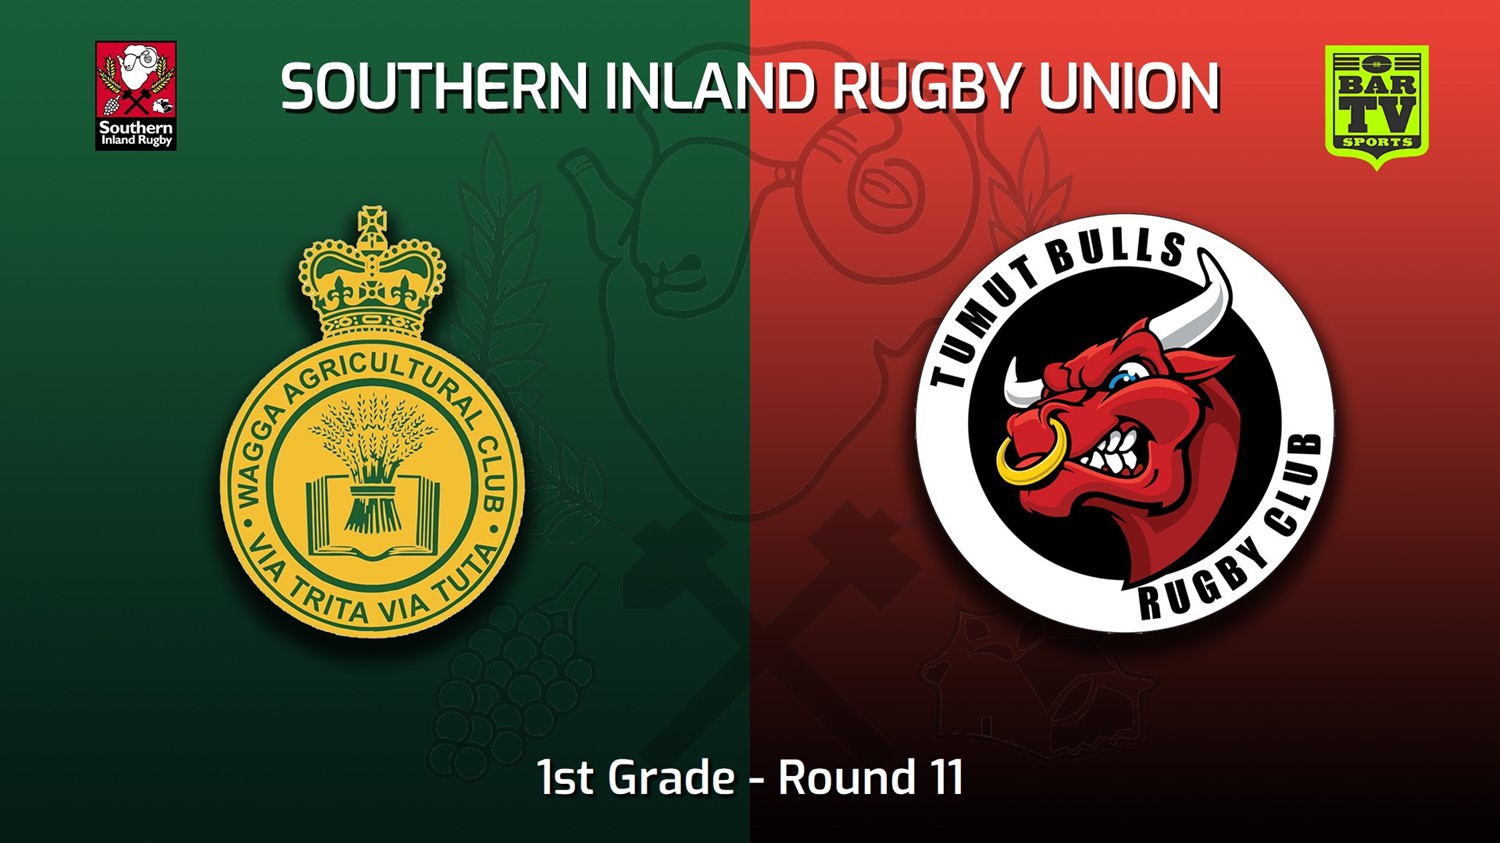 220625-Southern Inland Rugby Union Round 11 - 1st Grade - Wagga Agricultural College v Tumut Bulls Minigame Slate Image